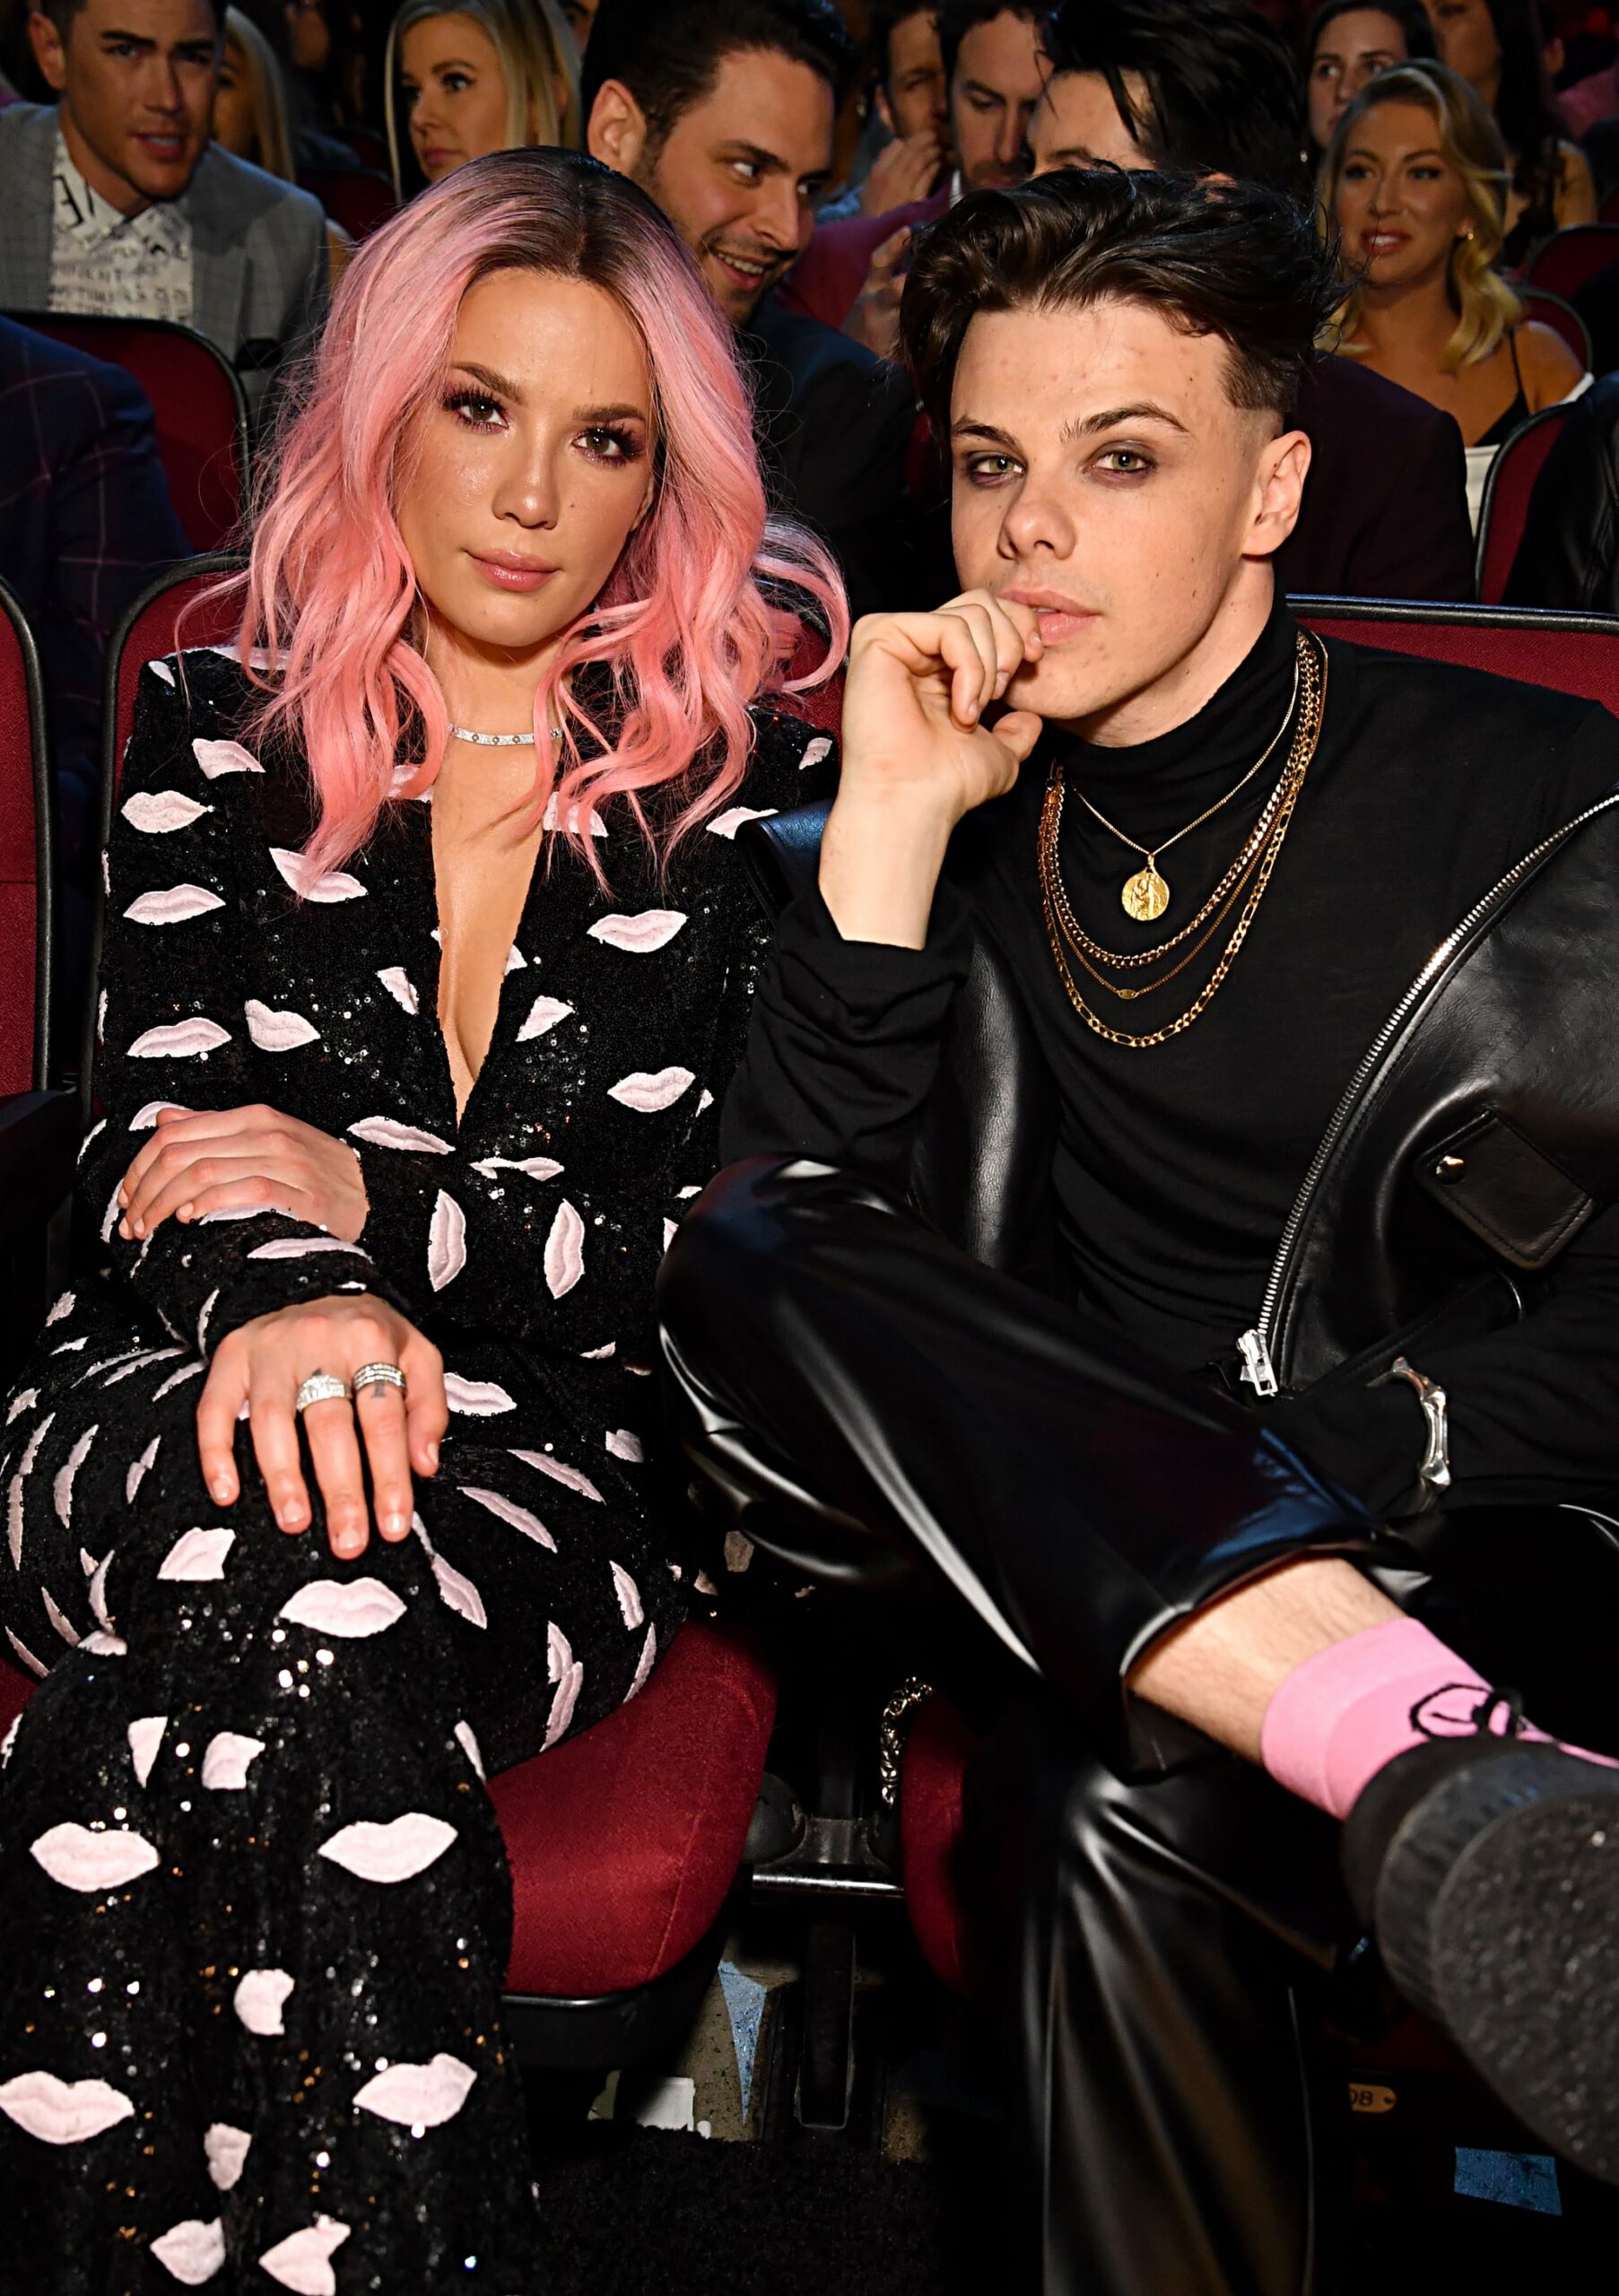 LOS ANGELES, CALIFORNIA - MARCH 14: (EDITORIAL USE ONLY. NO COMMERCIAL USE)  (L-R) Halsey and Yungblud attend the 2019 iHeartRadio Music Awards which broadcasted live on FOX at the Microsoft Theater on March 14, 2019 in Los Angeles, California. (Photo by Jeff Kravitz/FilmMagic for iHeartMedia )